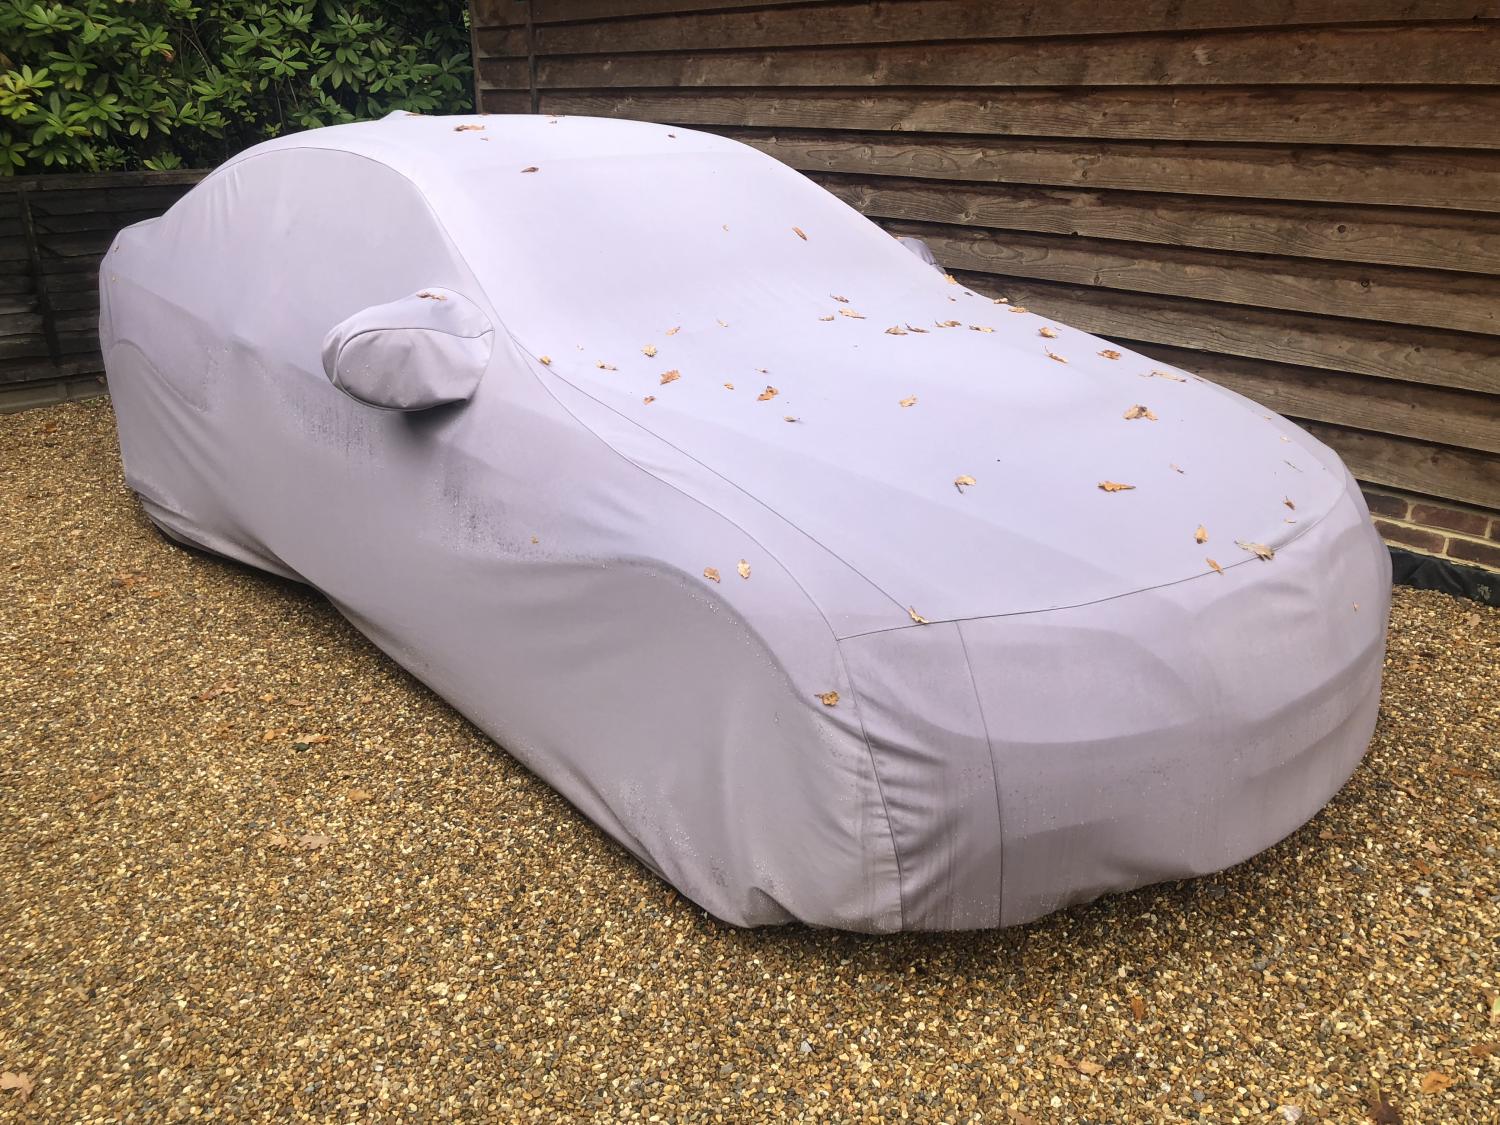 Custom Made Outdoor Car Cover in Outdoor car covers